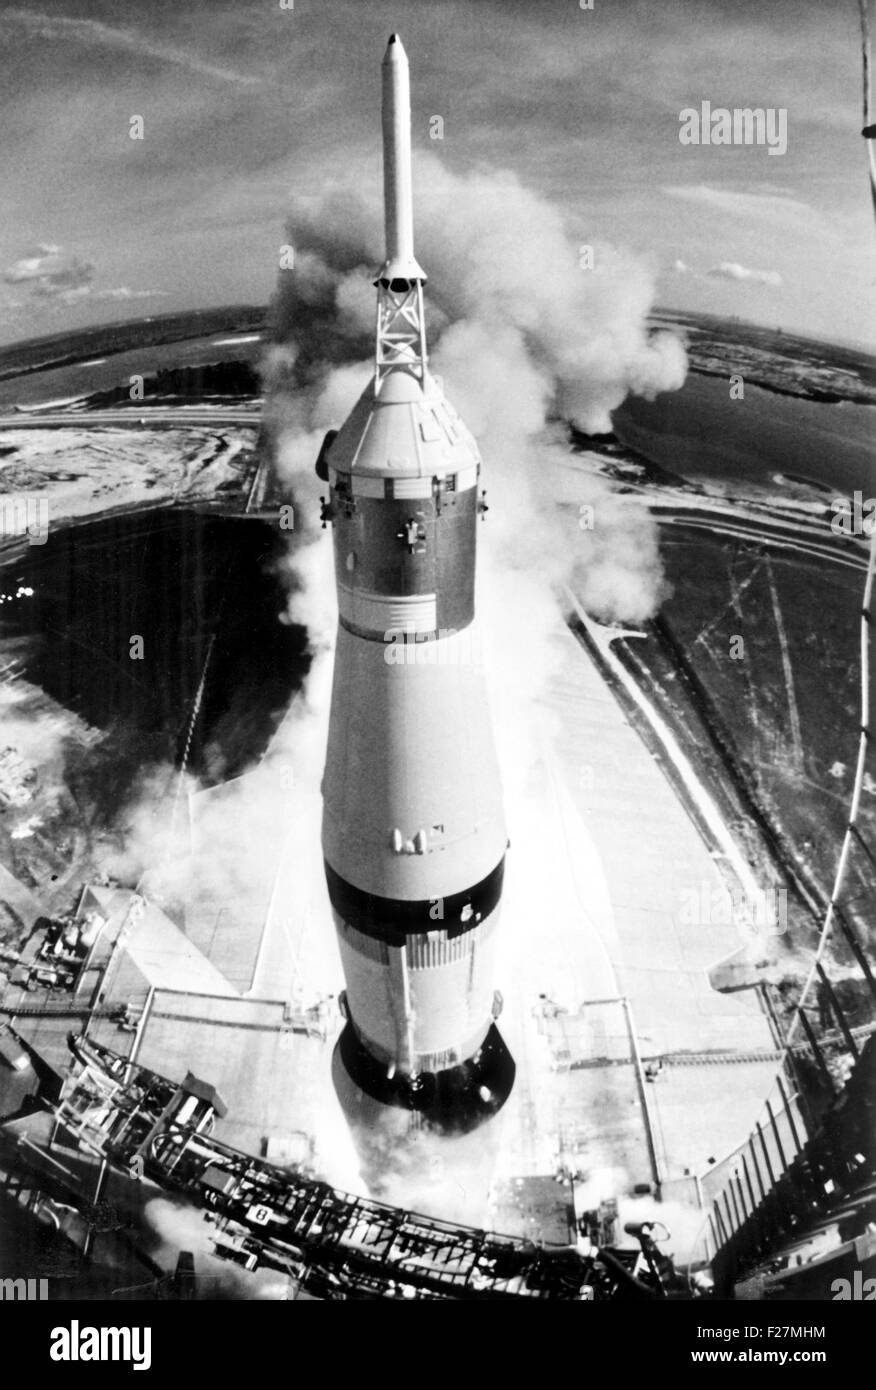 The Apollo 11 mission, carried on top the Saturn V rocket lifts off from the Kennedy Space Center July 16, 1969 in Cape Canaveral, Florida. Apollo 11 was the first moon landing mission carrying astronauts Neil A. Armstrong, Michael Collins, and Buzz Aldrin Jr. Stock Photo